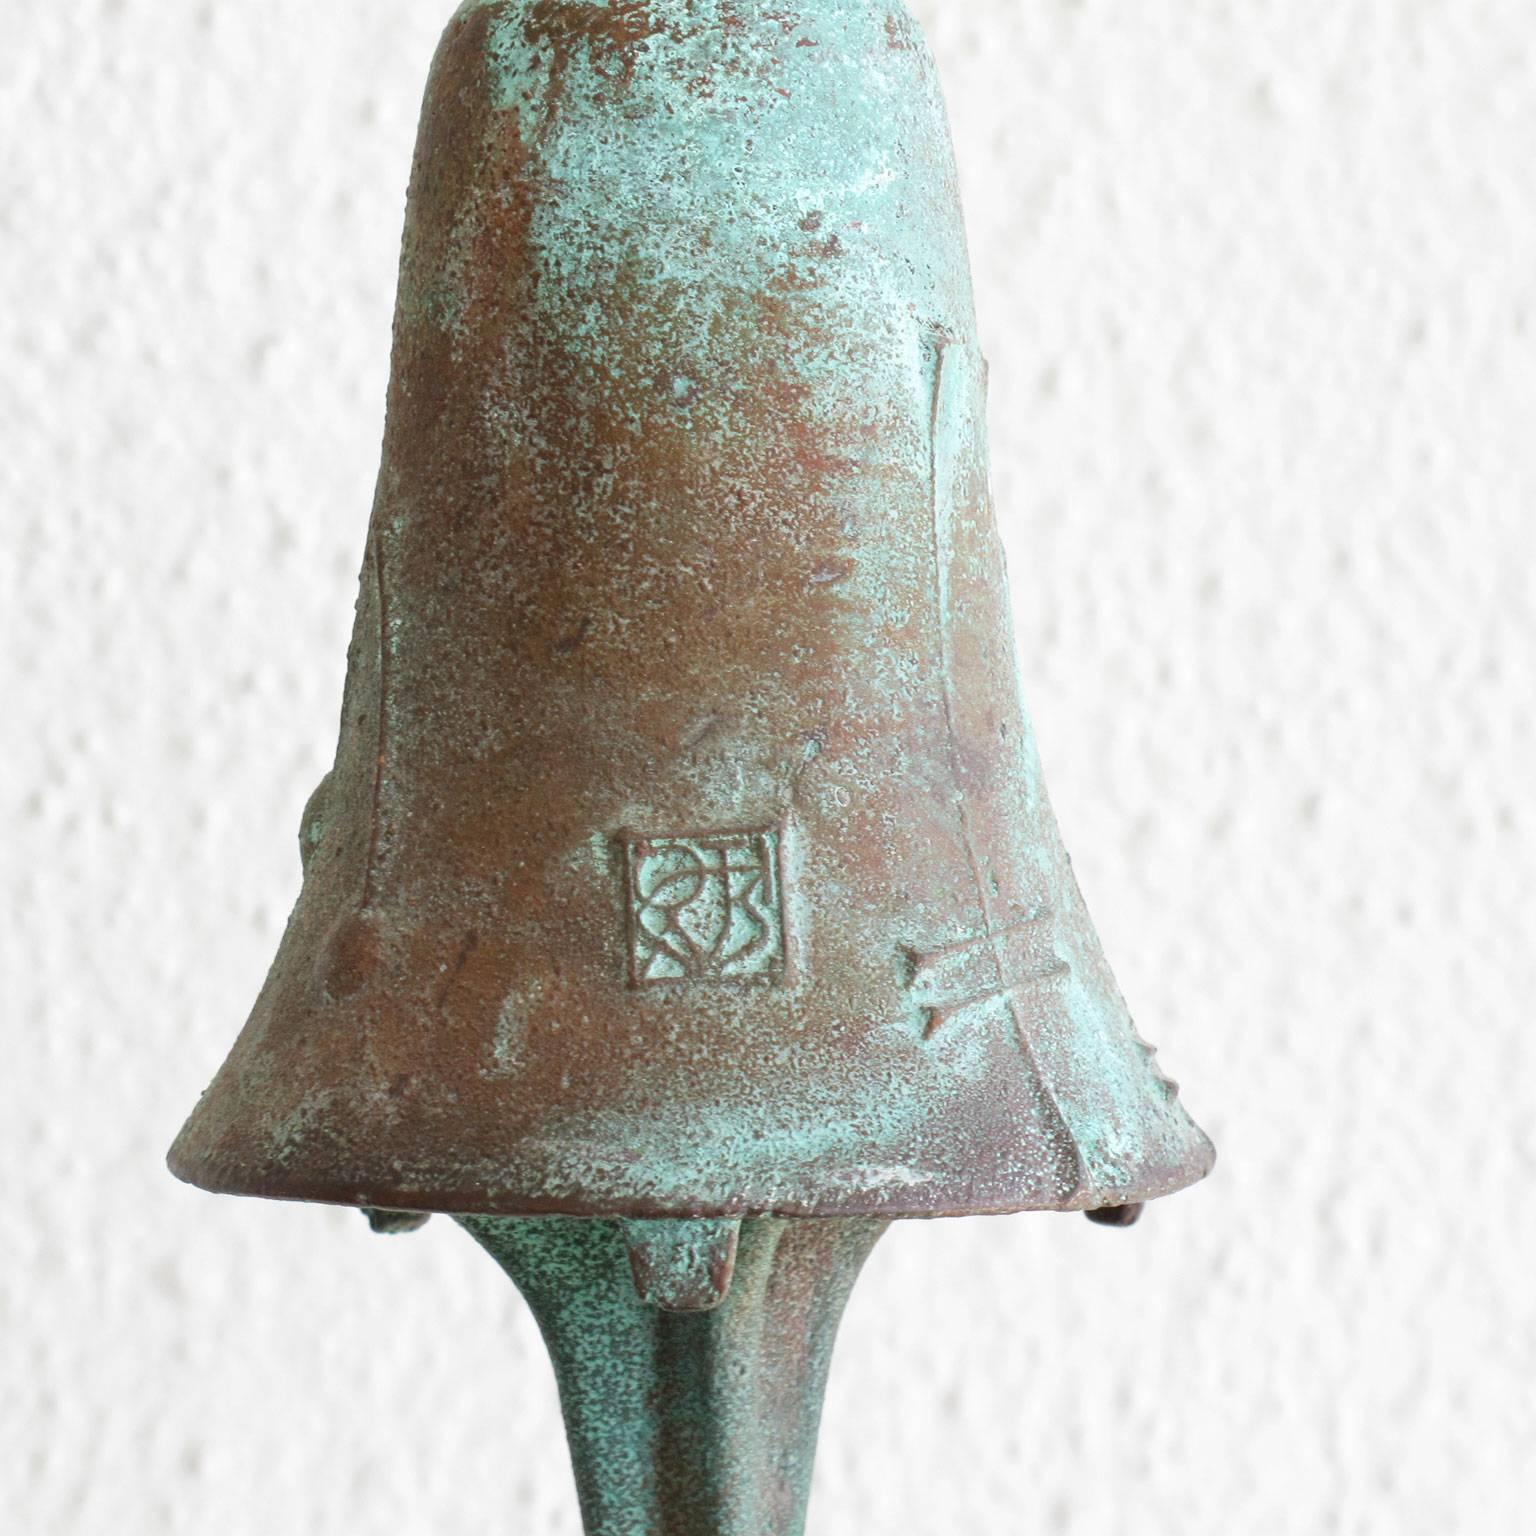 Paolo Soleri
Wind chime bell, solid cast bronze, heavily patinated surface
Signed with Arcosanti square emblem
Arizona, 1970s

Dimensions: 22.5 high x 3.25 diameter inches

Condition: Excellent vintage, fascinating patina, see images
